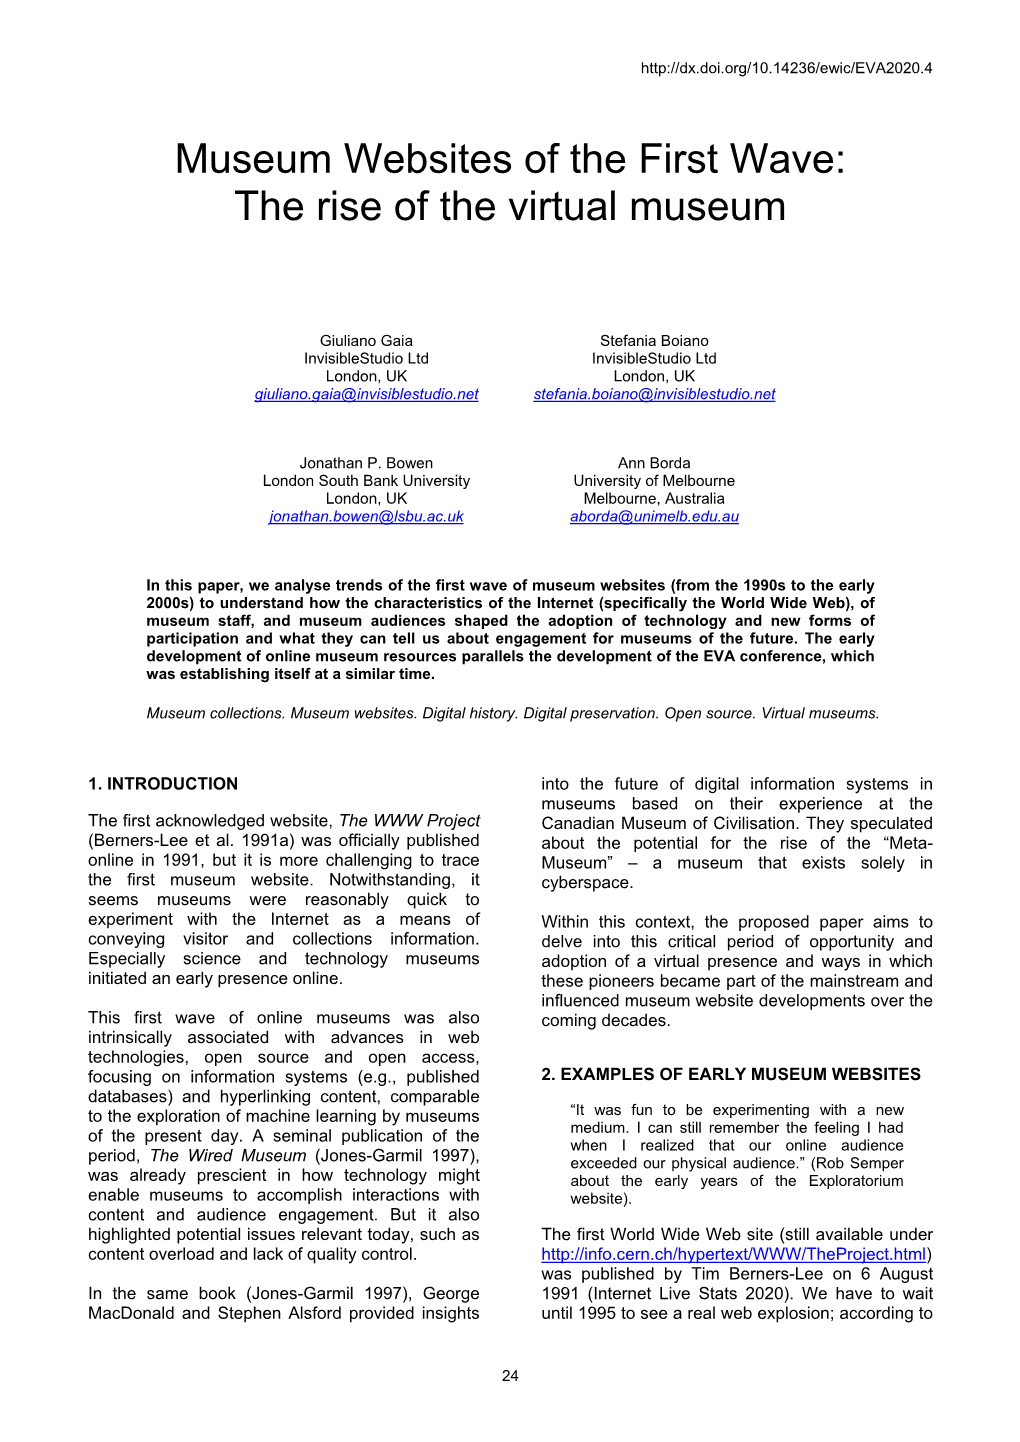 Museum Websites of the First Wave: the Rise of the Virtual Museum